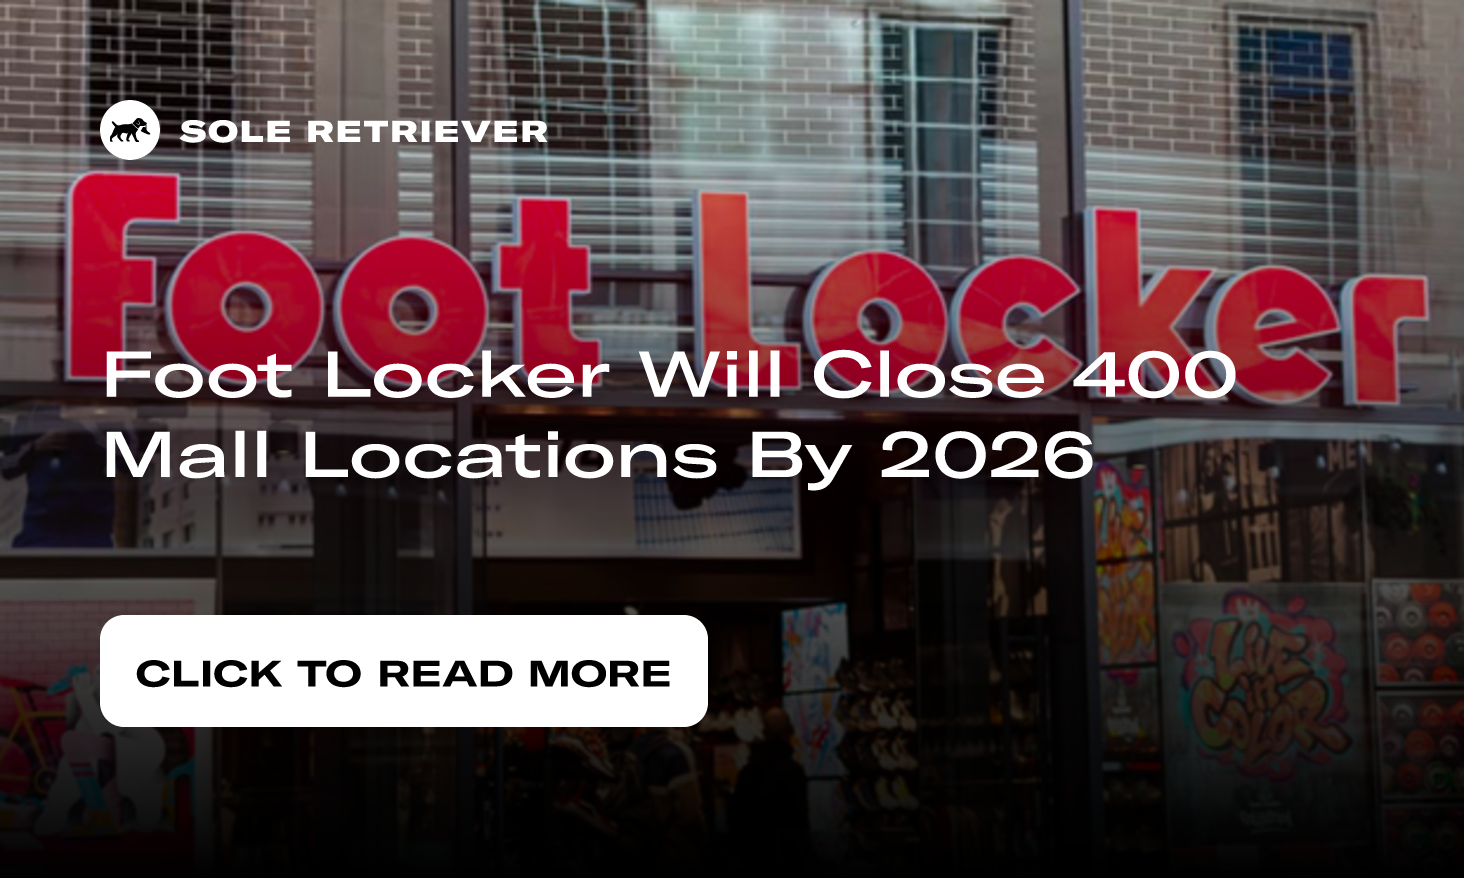 Foot Locker plans to expand customer base “off mall” with recent